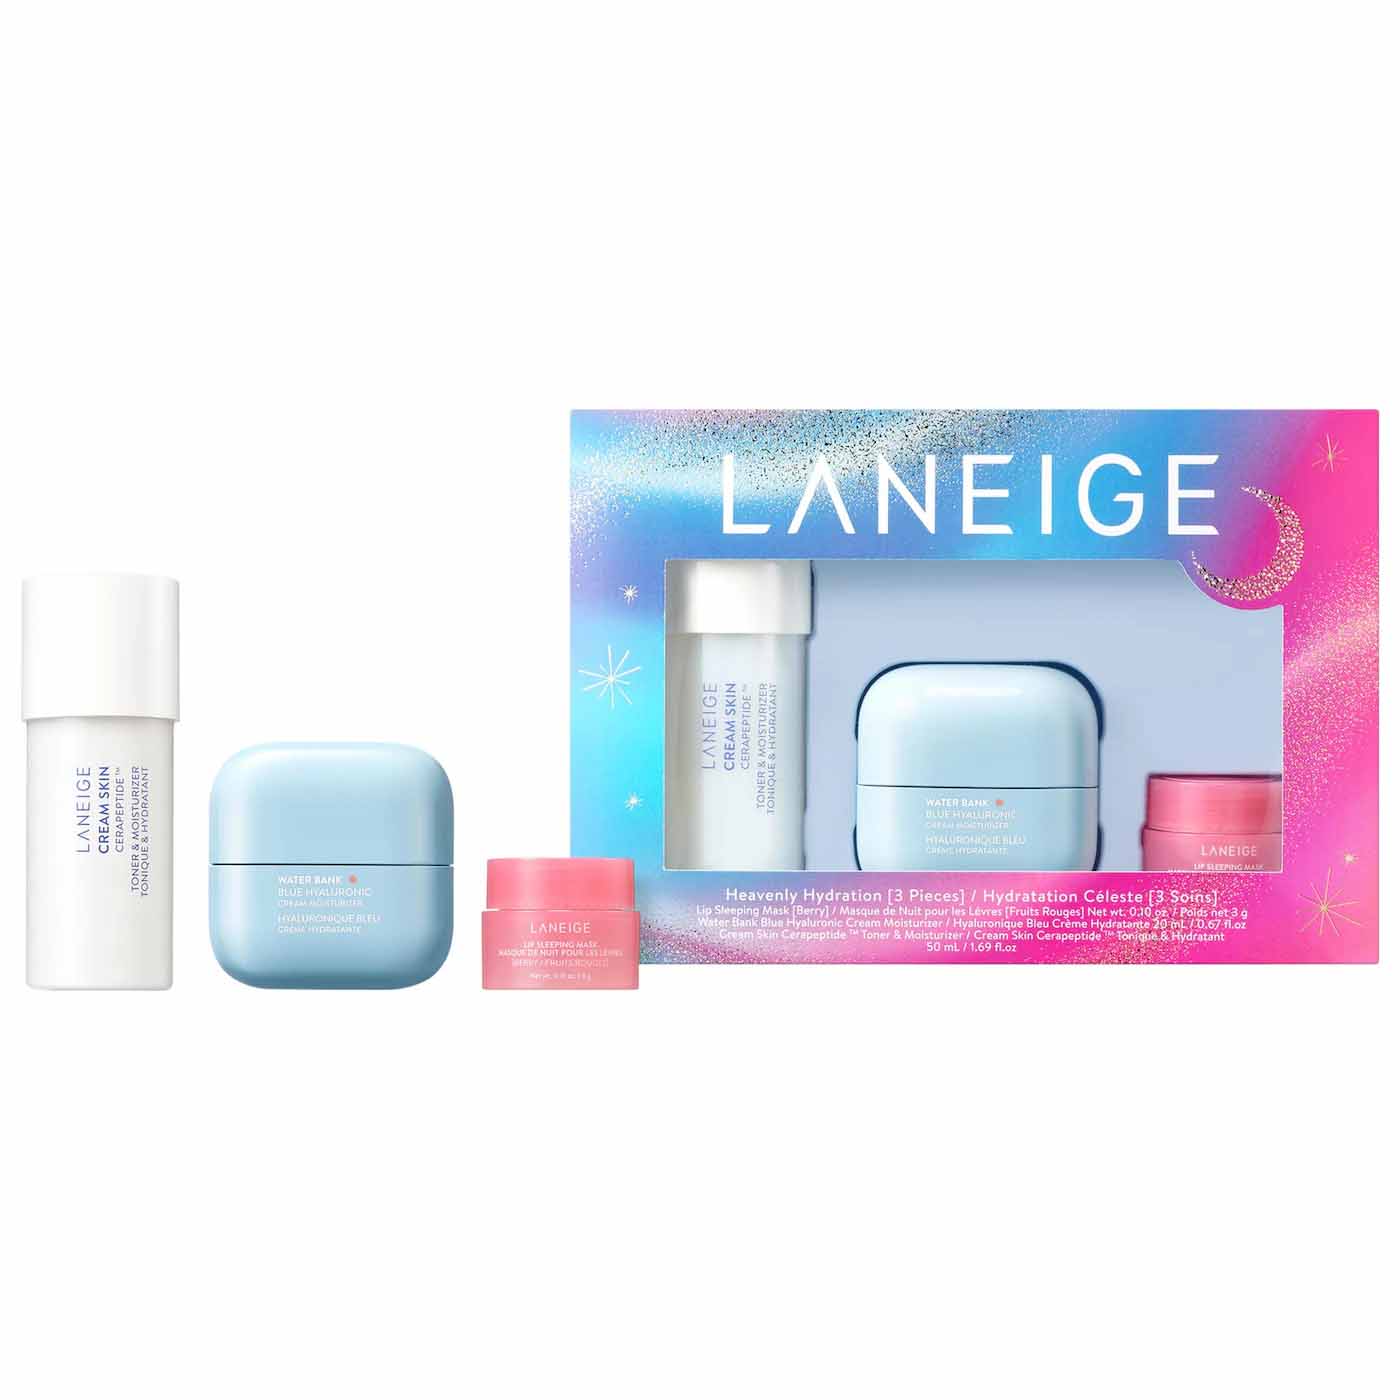 LANEIGE Heavenly Hydration Set with mini creams, moisturizer and lip mask